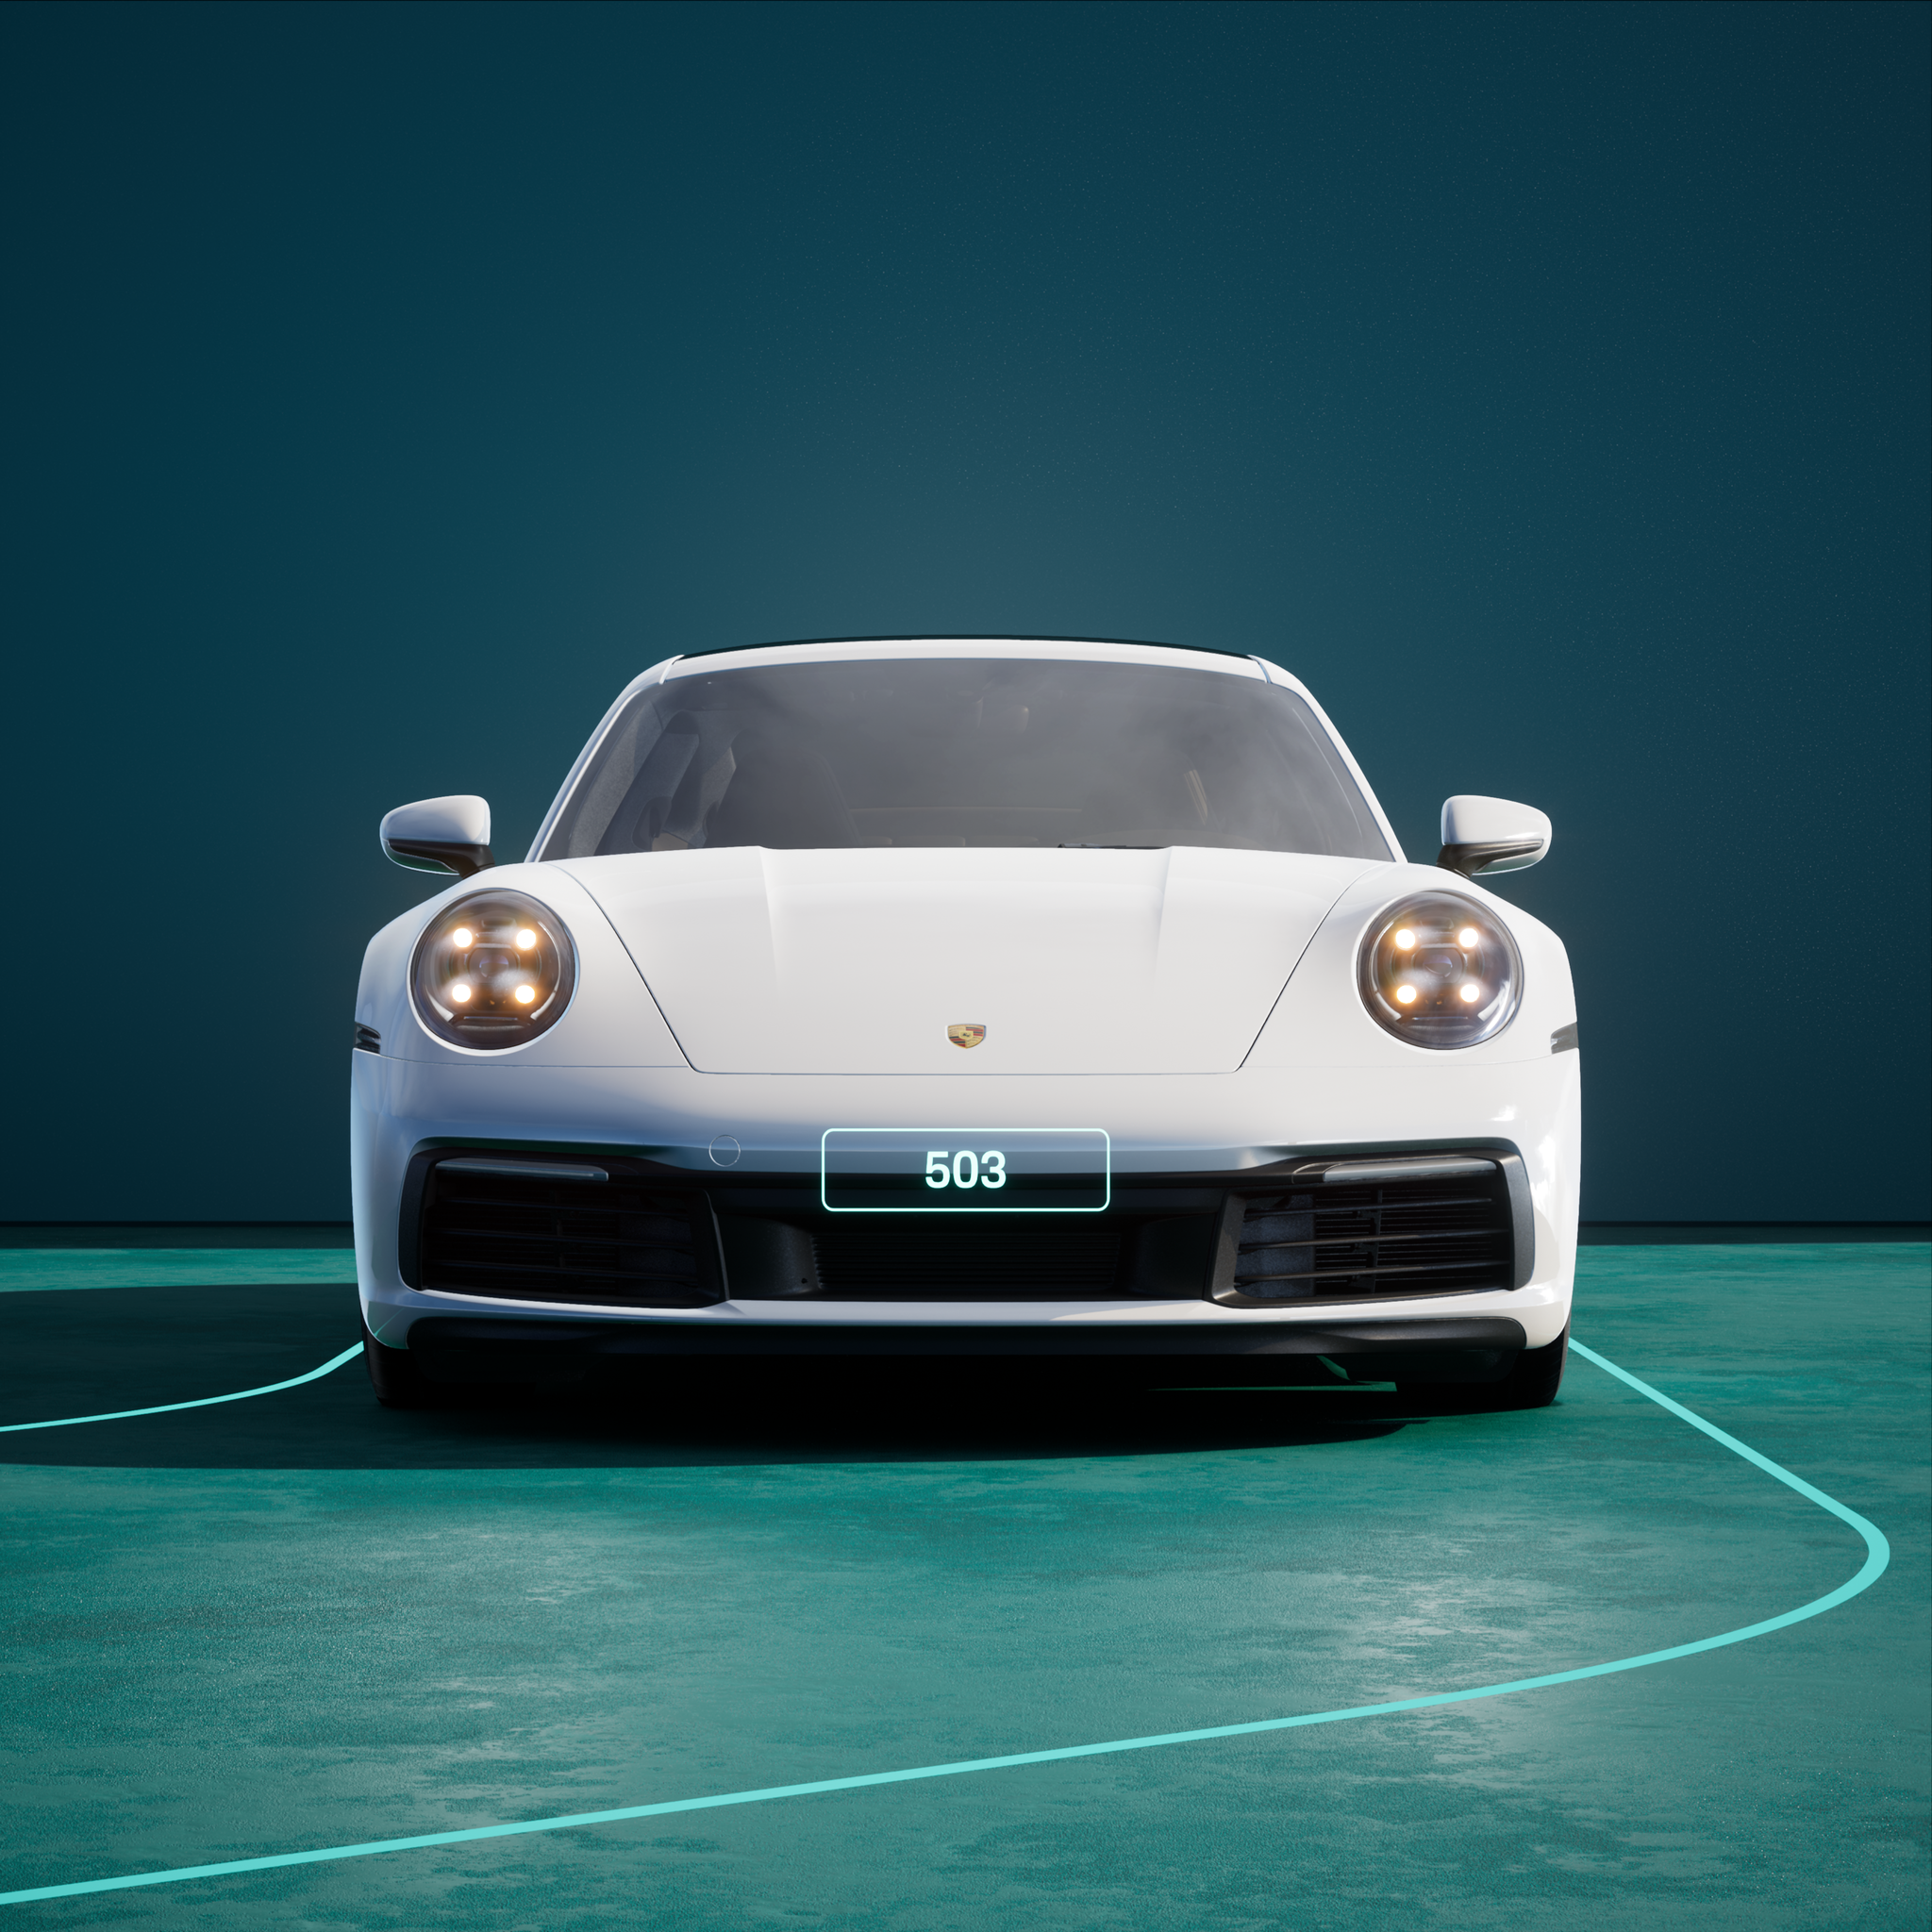 The PORSCHΞ 911 503 image in phase